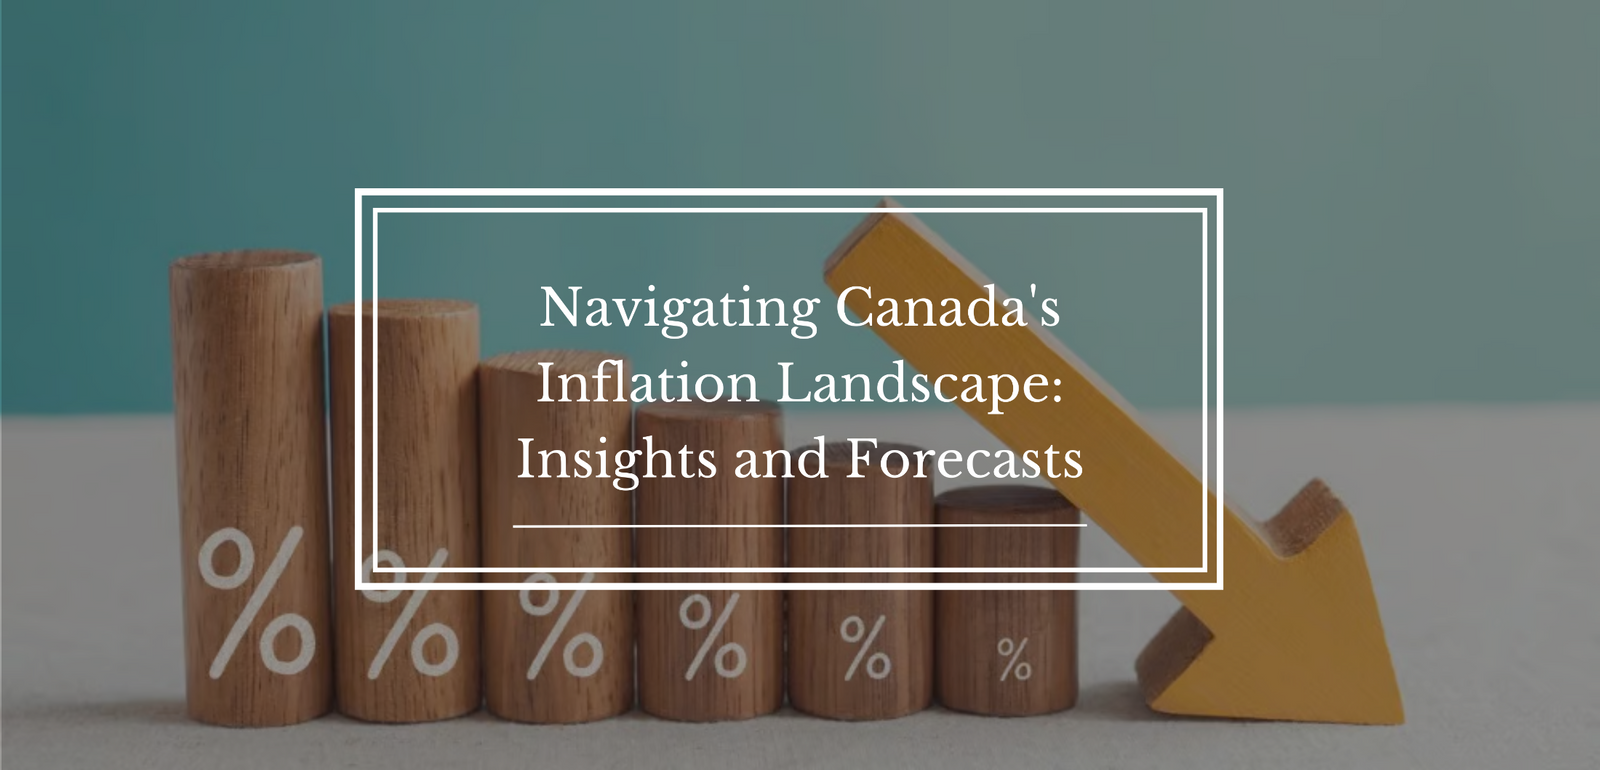 Navigating Canada's Inflation Landscape: Insights and Forecasts